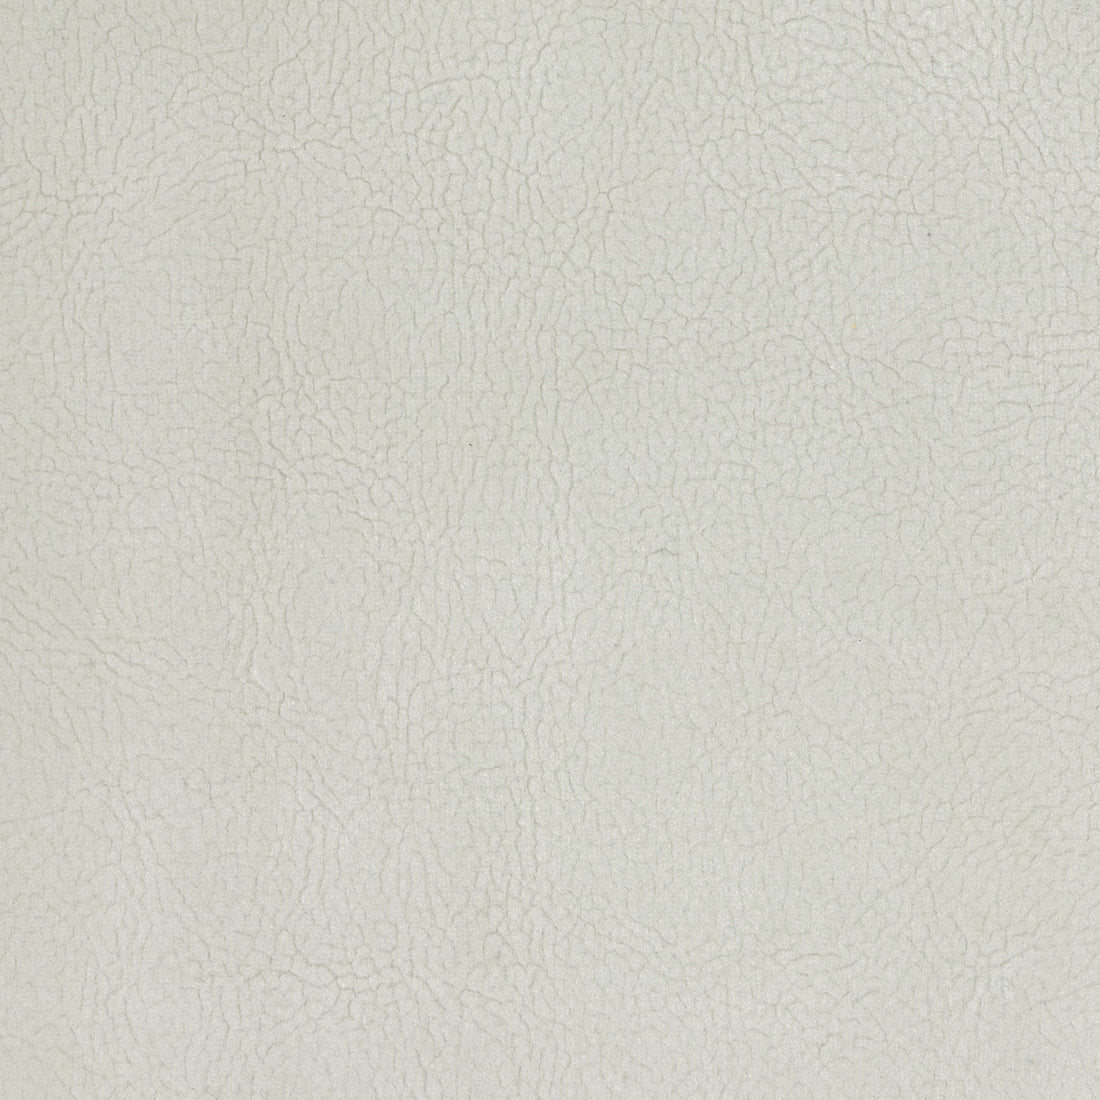 Georgia Suede fabric in gesso color - pattern number H6 37415937 - by Scalamandre in the Old World Weavers collection